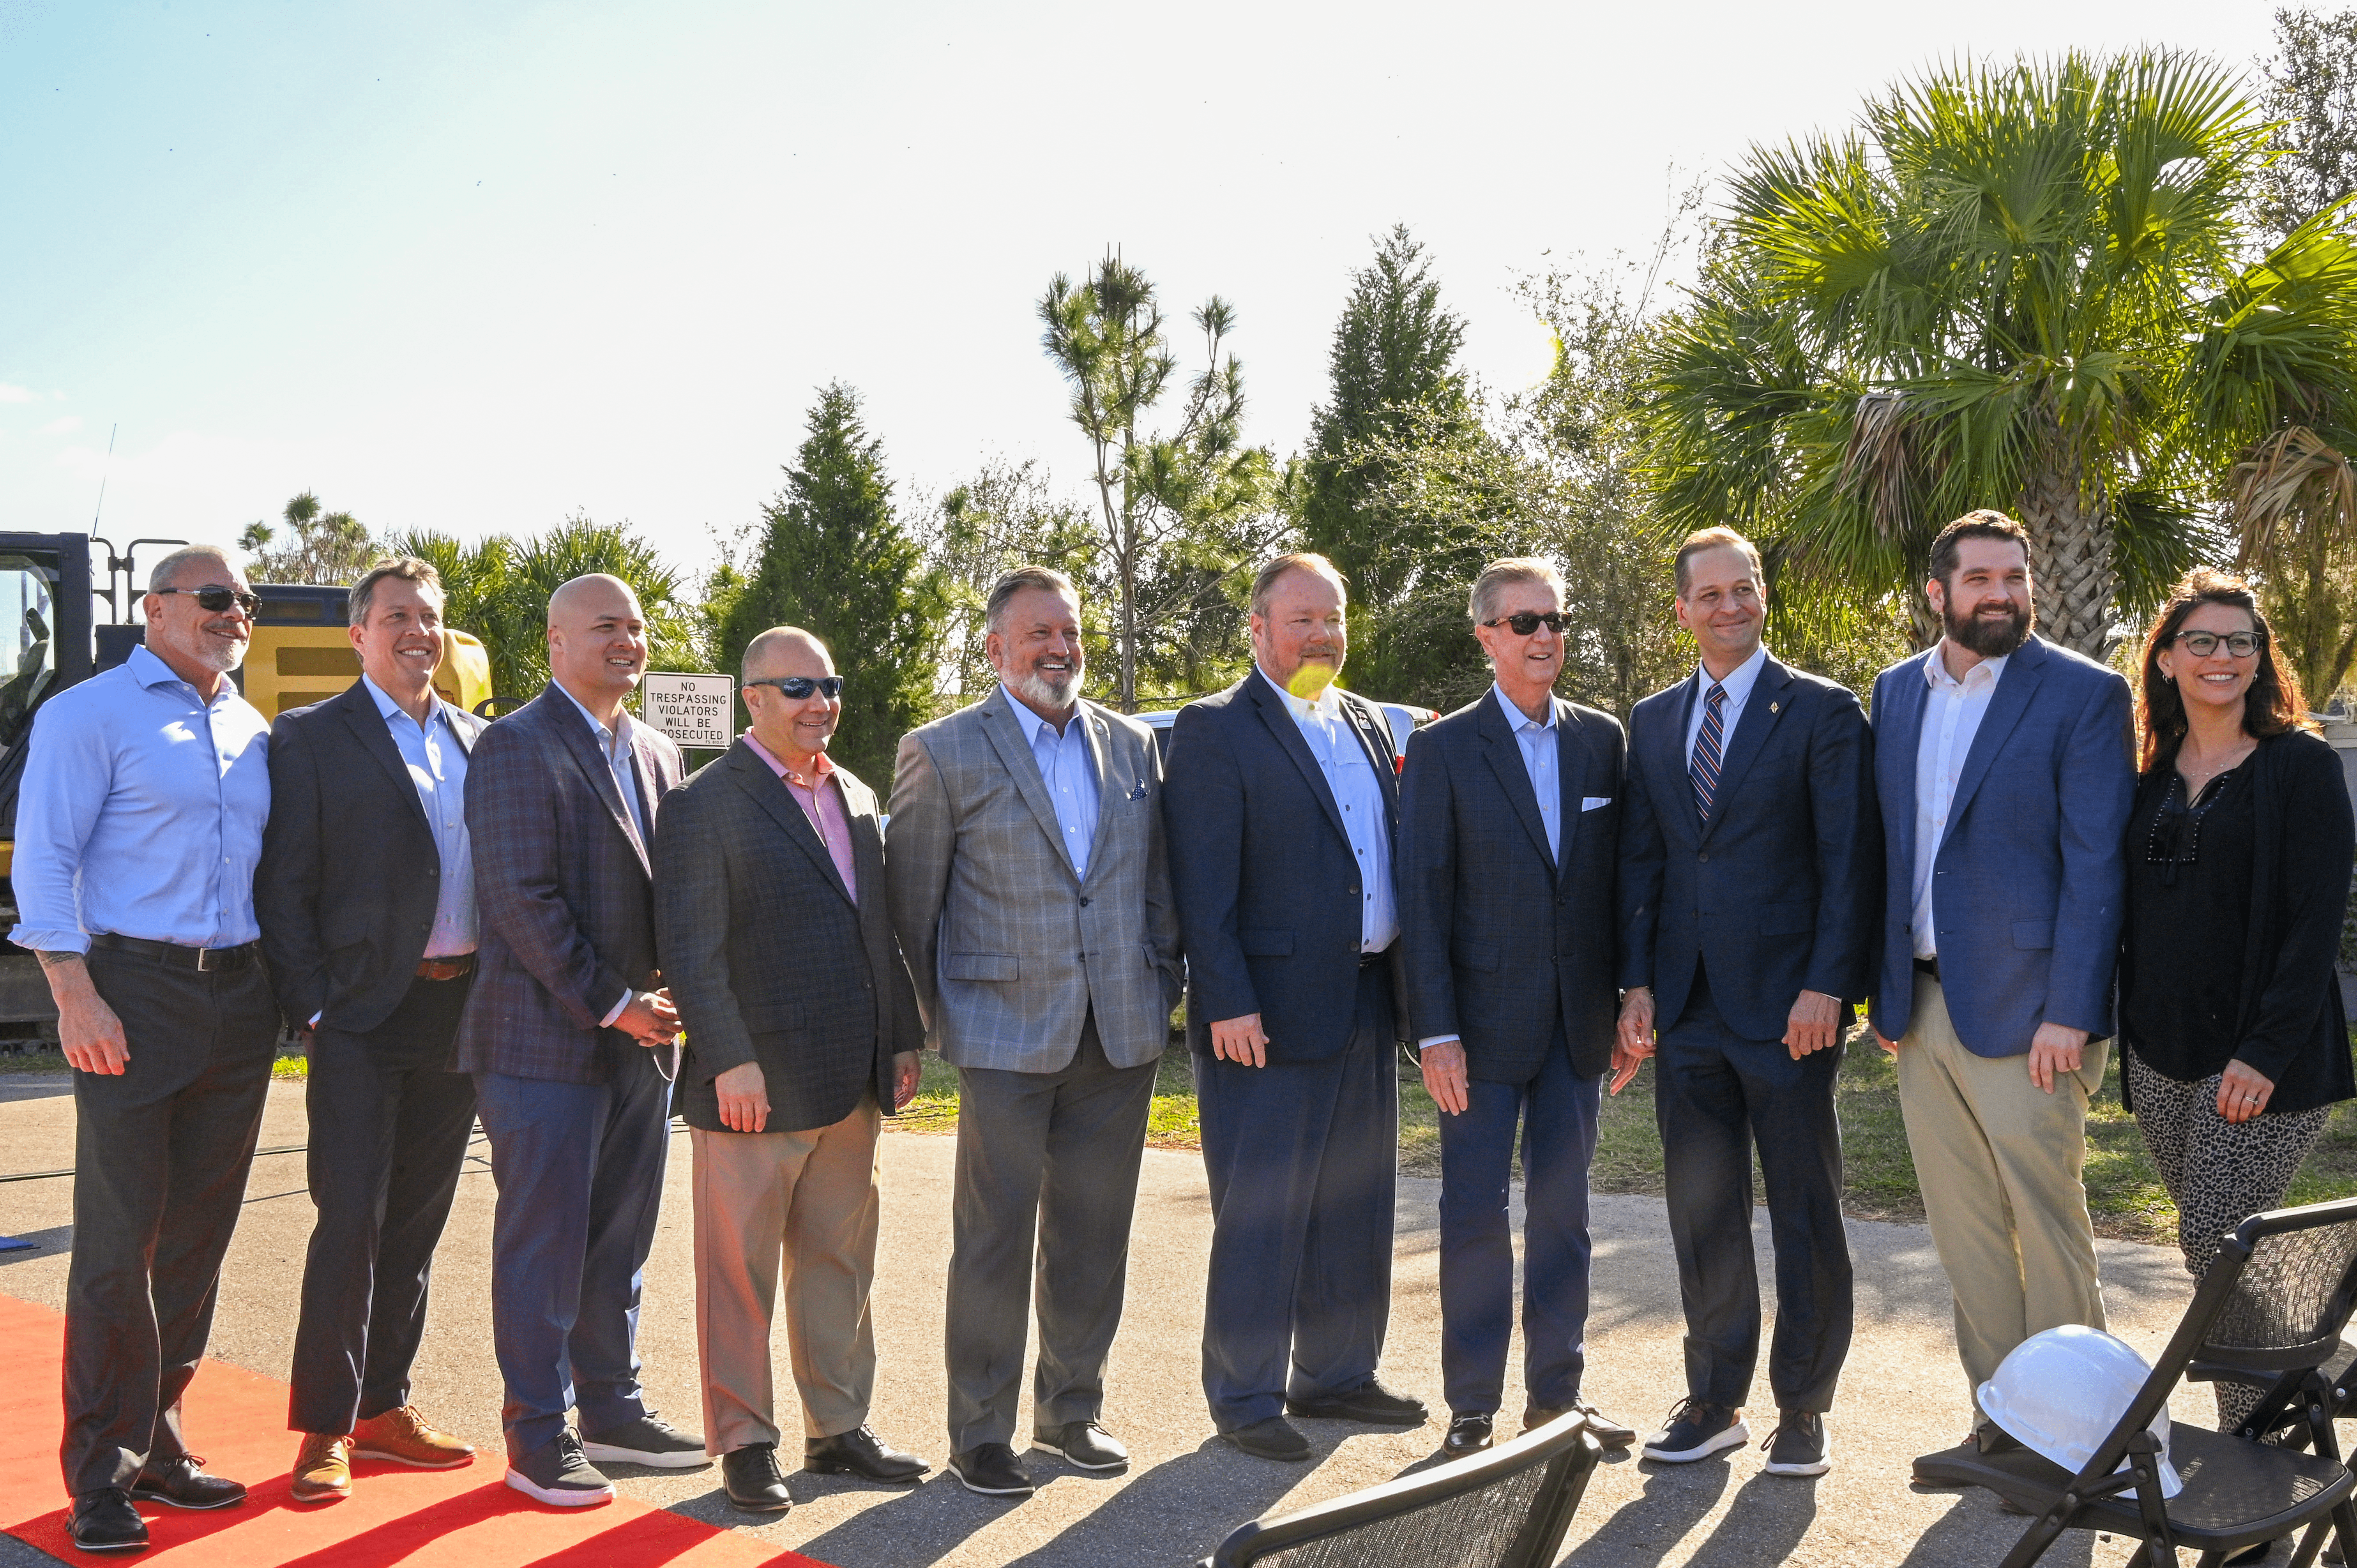 A group photo of 10 people in front of the groundbreaking